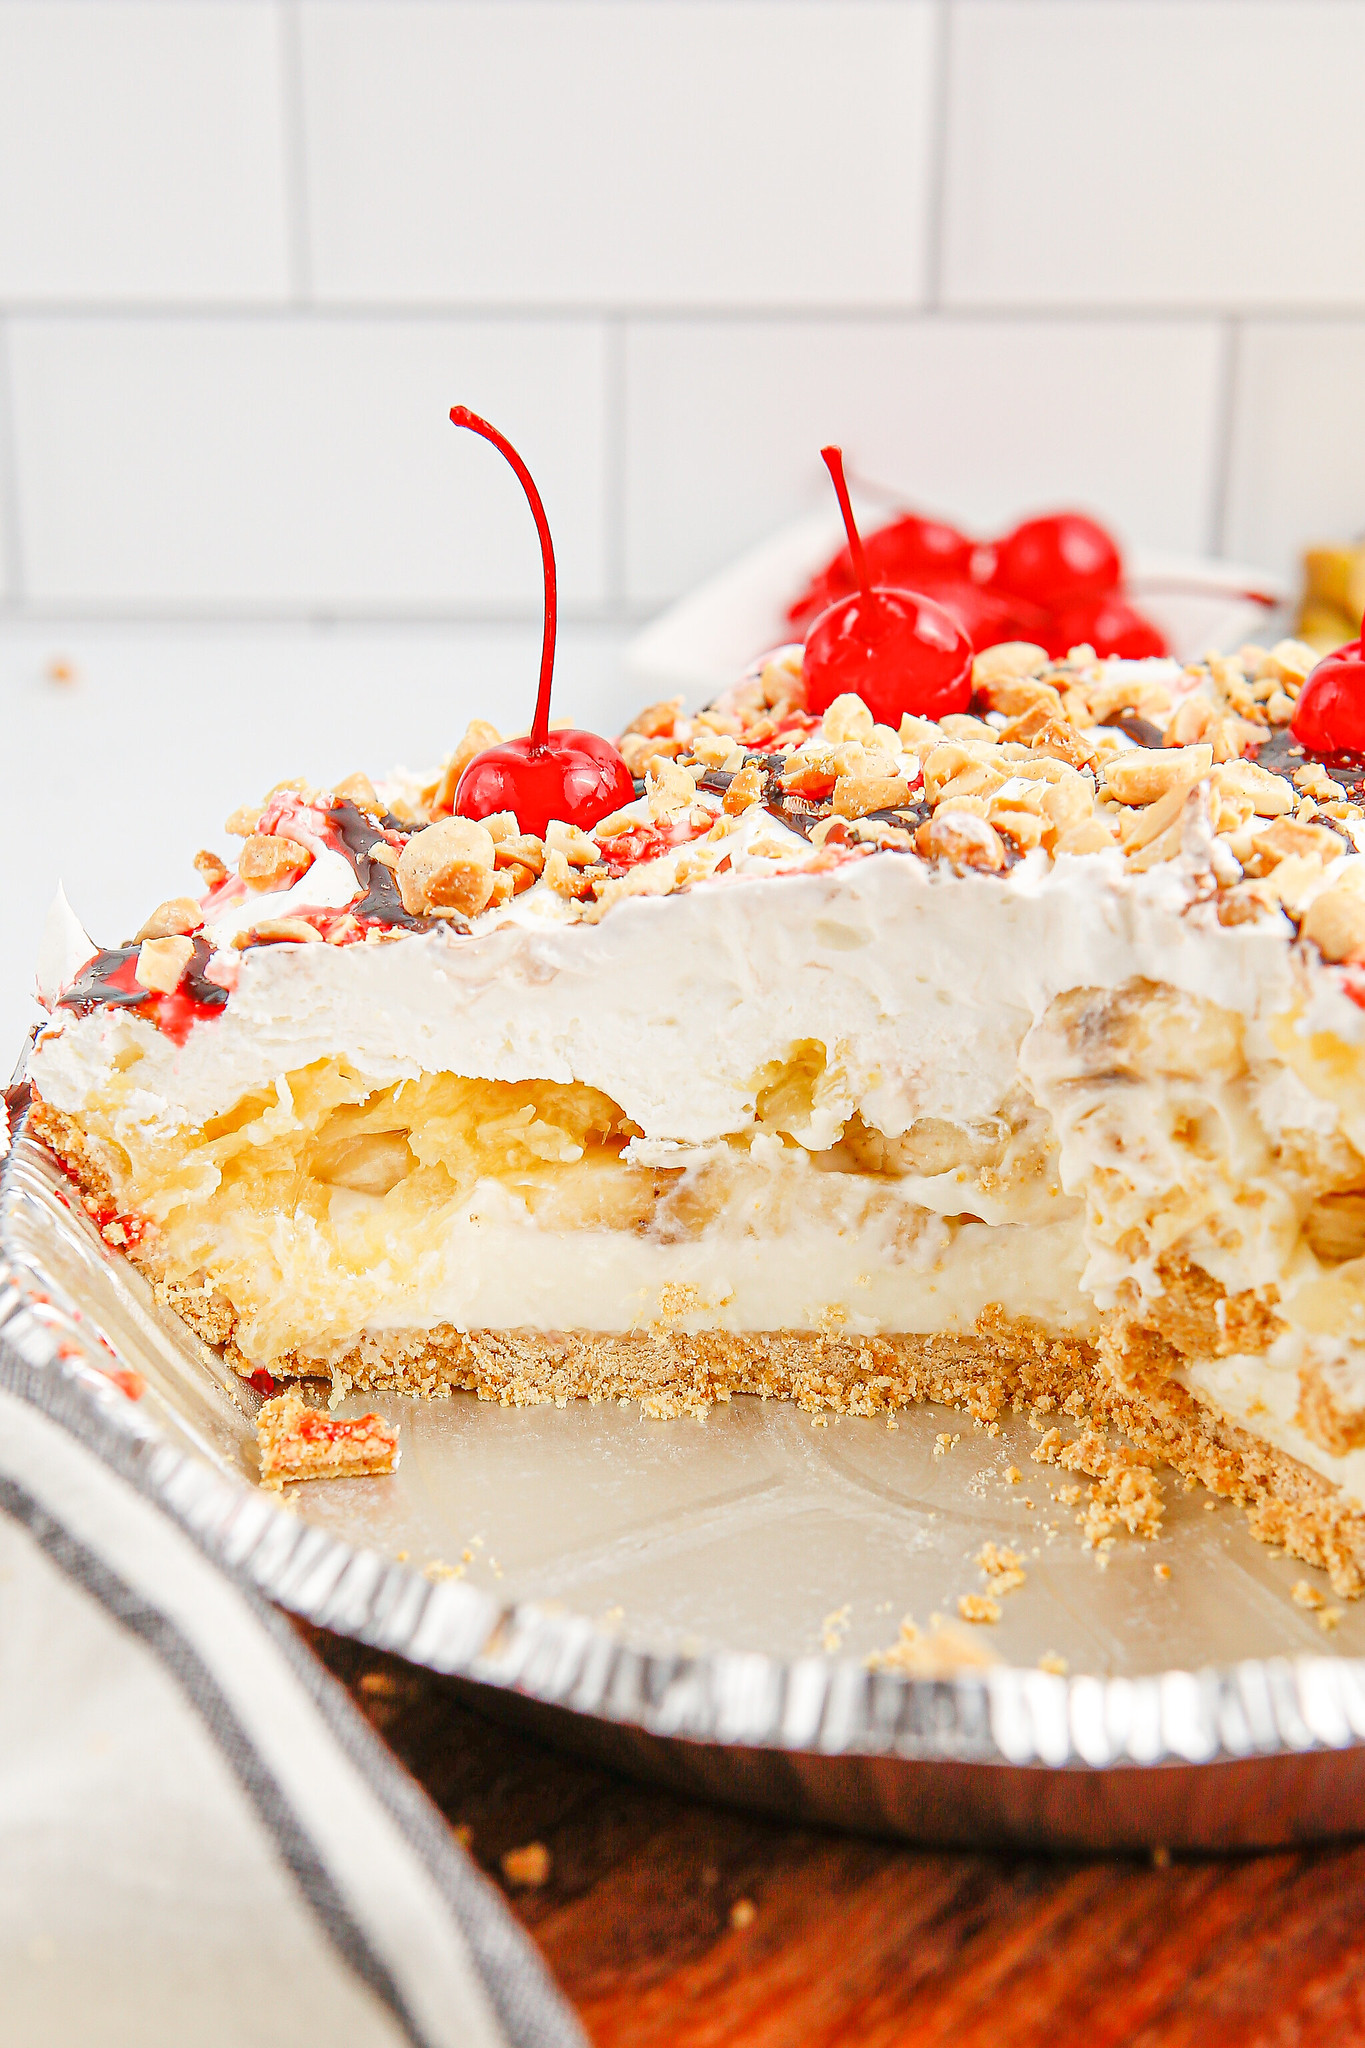 Cross section of banana split pie with layers of graham cracker crust, bananas, pineapple, and whipped cream